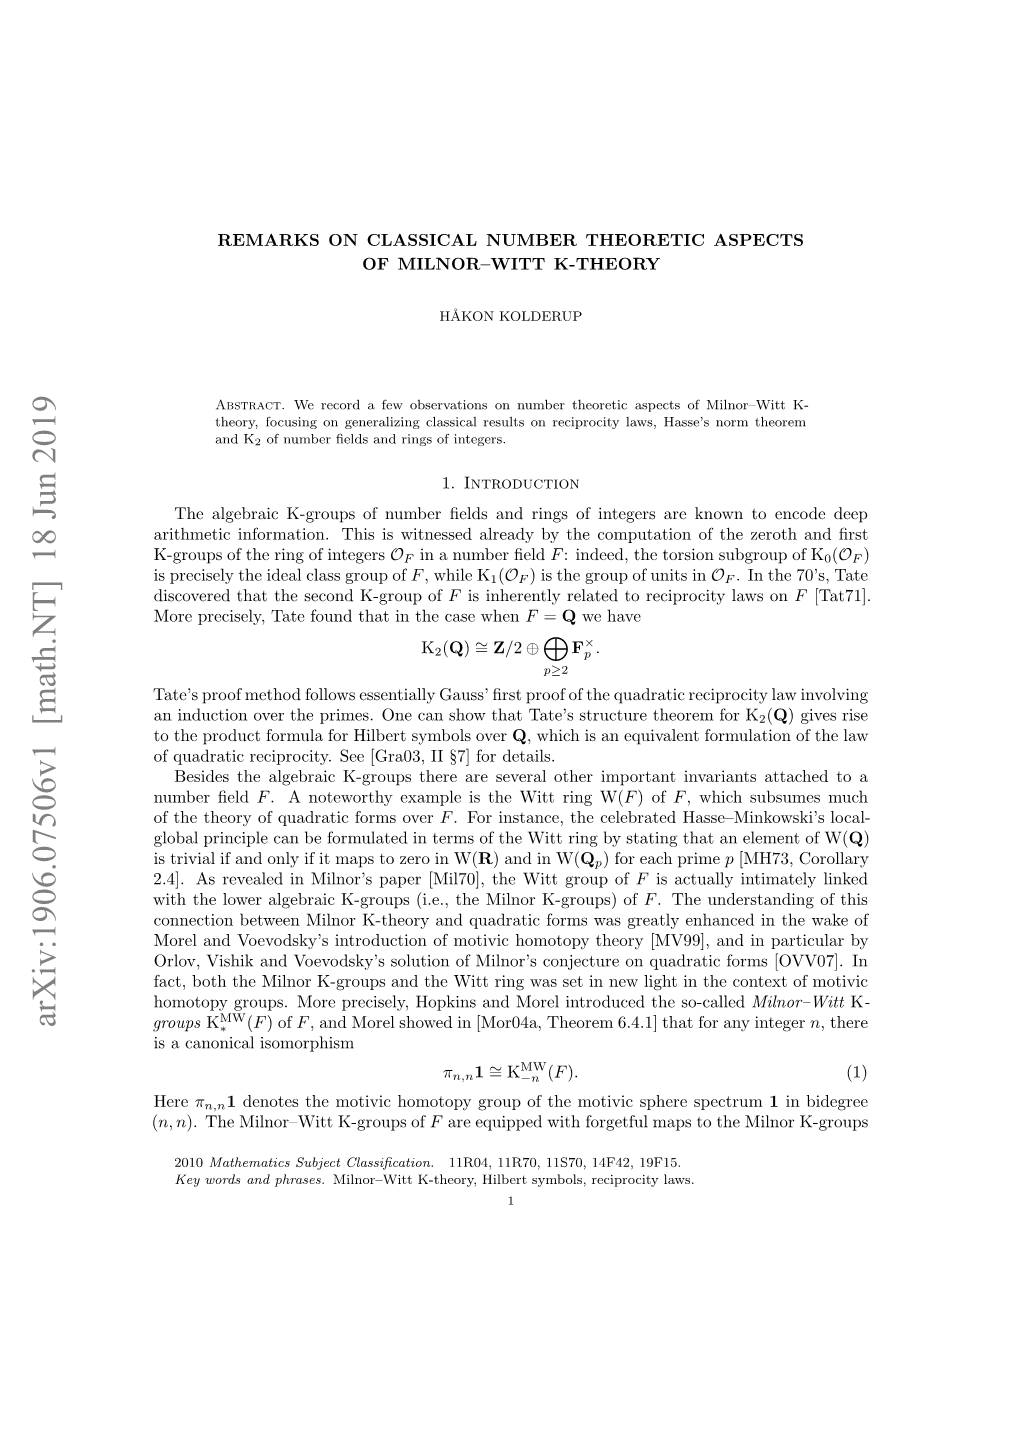 Remarks on Classical Number Theoretic Aspects of Milnor-Witt K